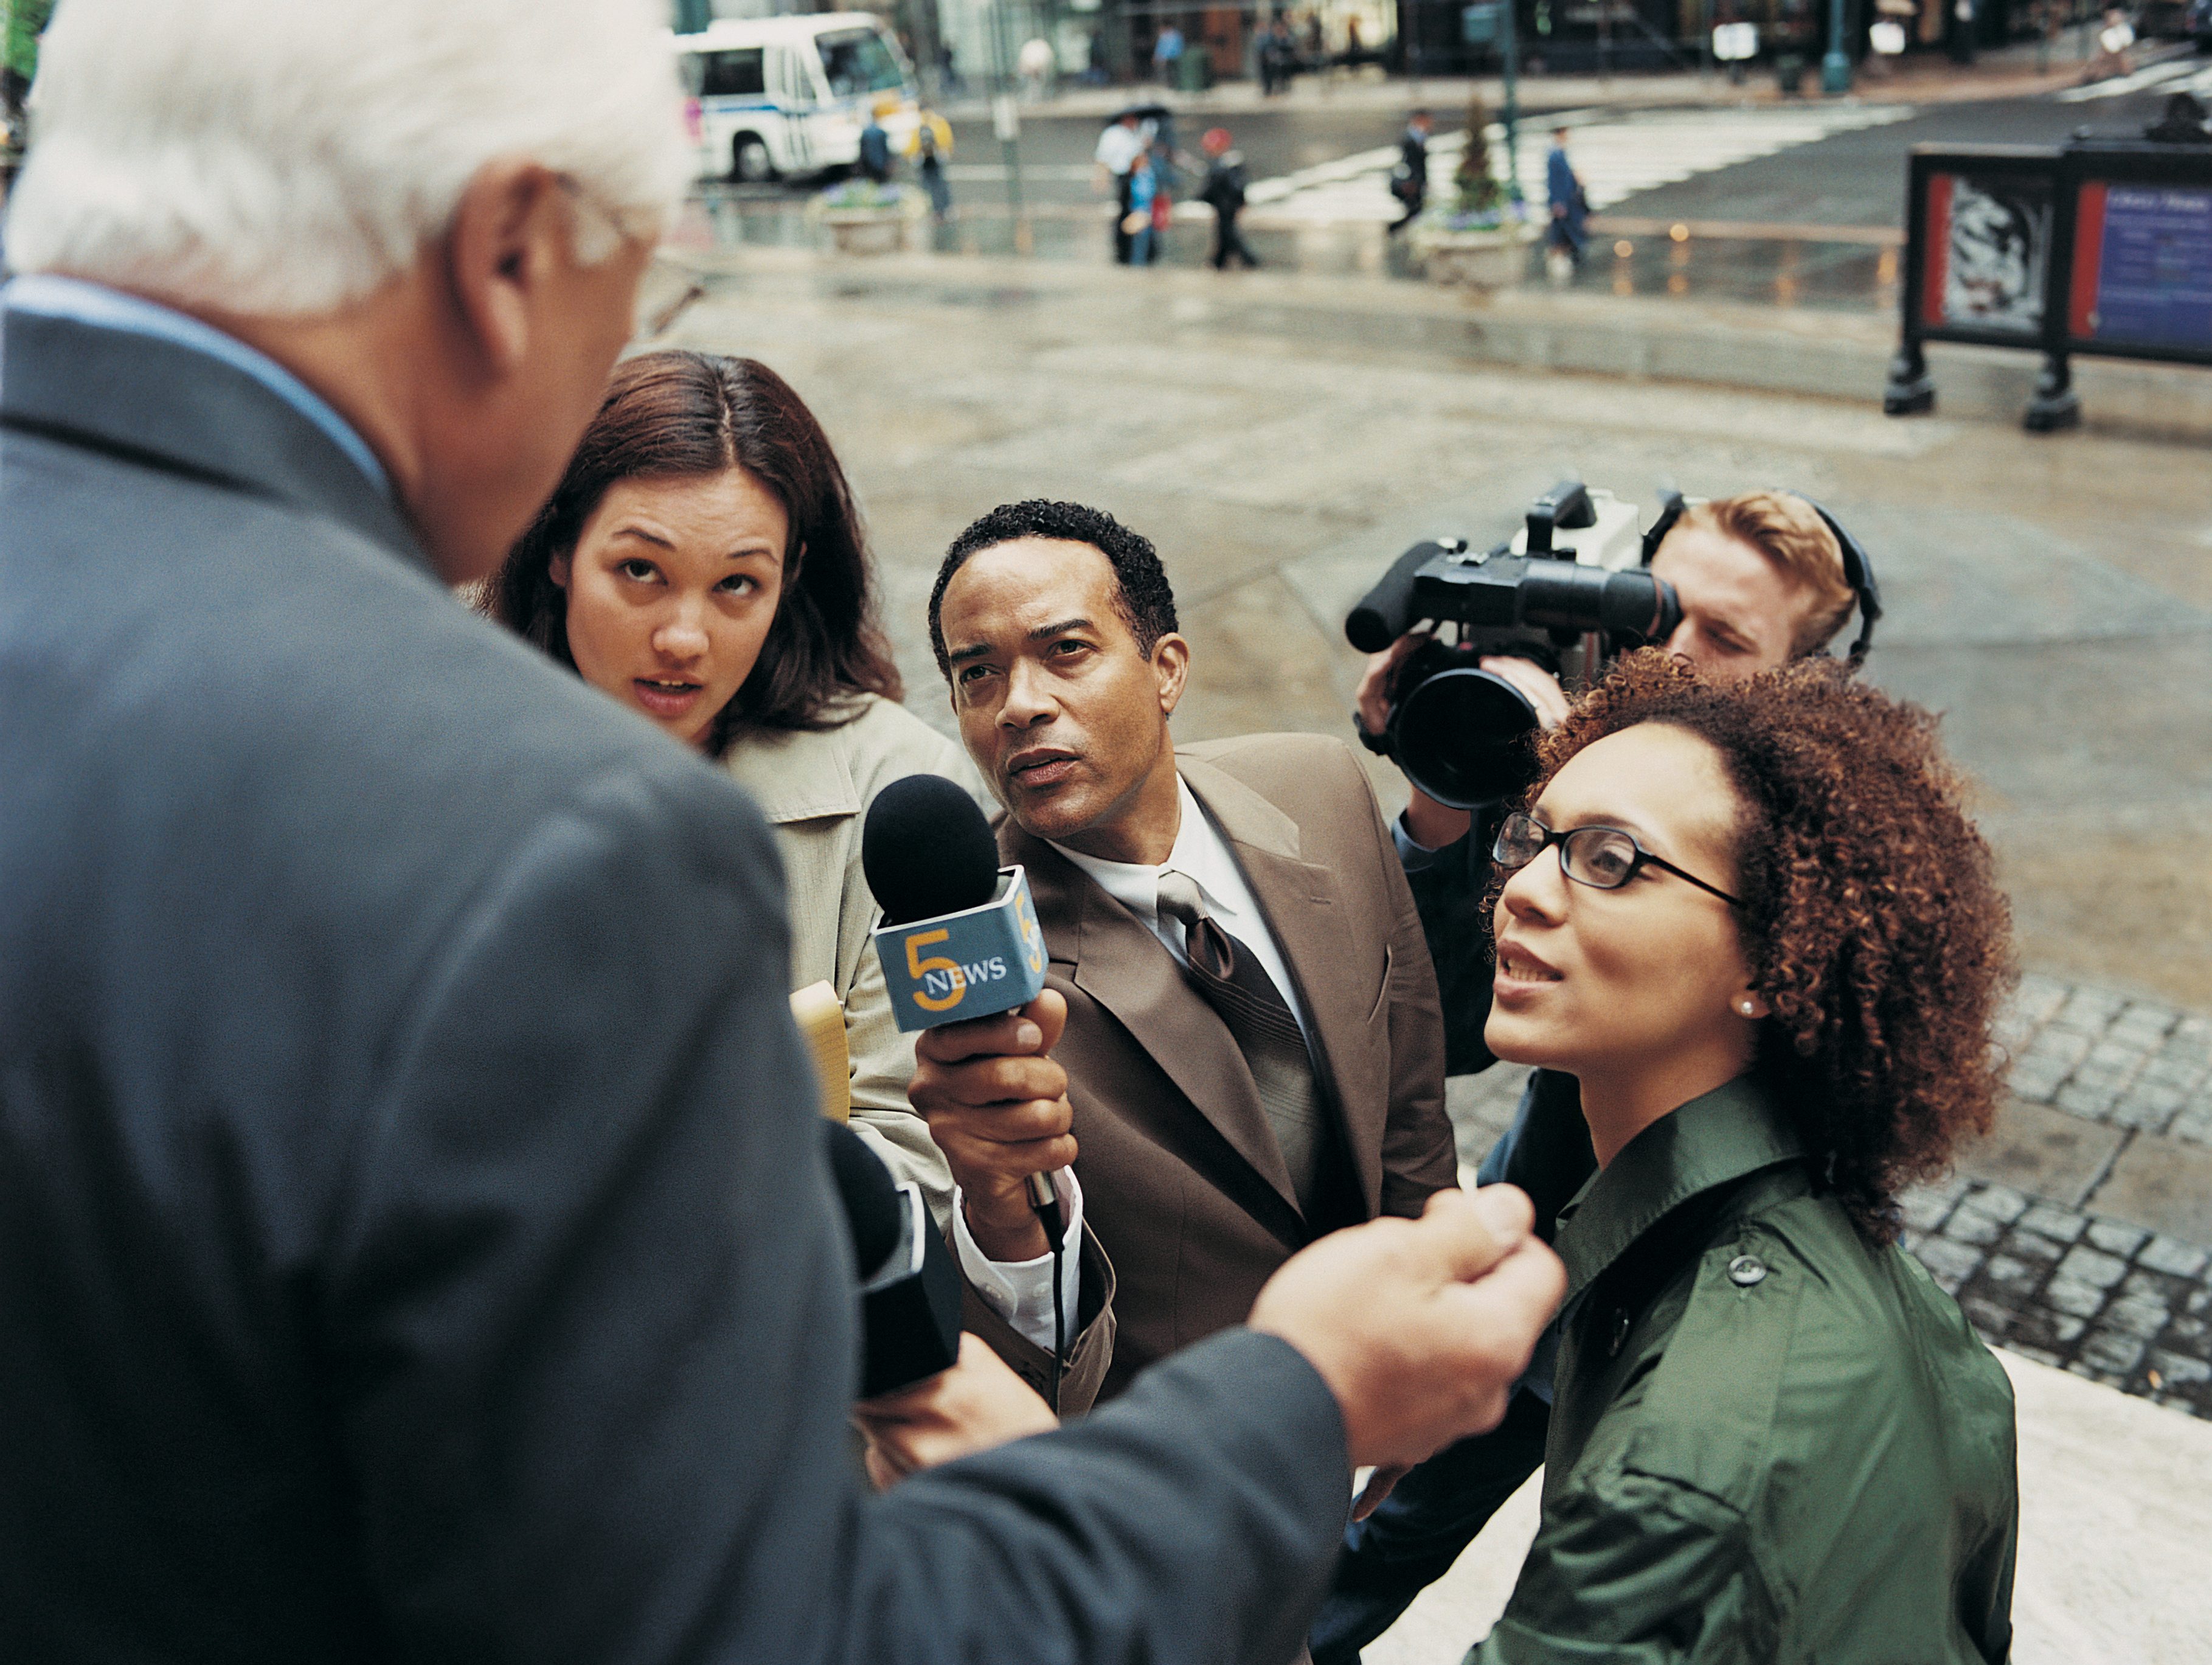 "News Reporters and a TV Cameraman" by Digital Vision is licensed under CC BY 2.0.